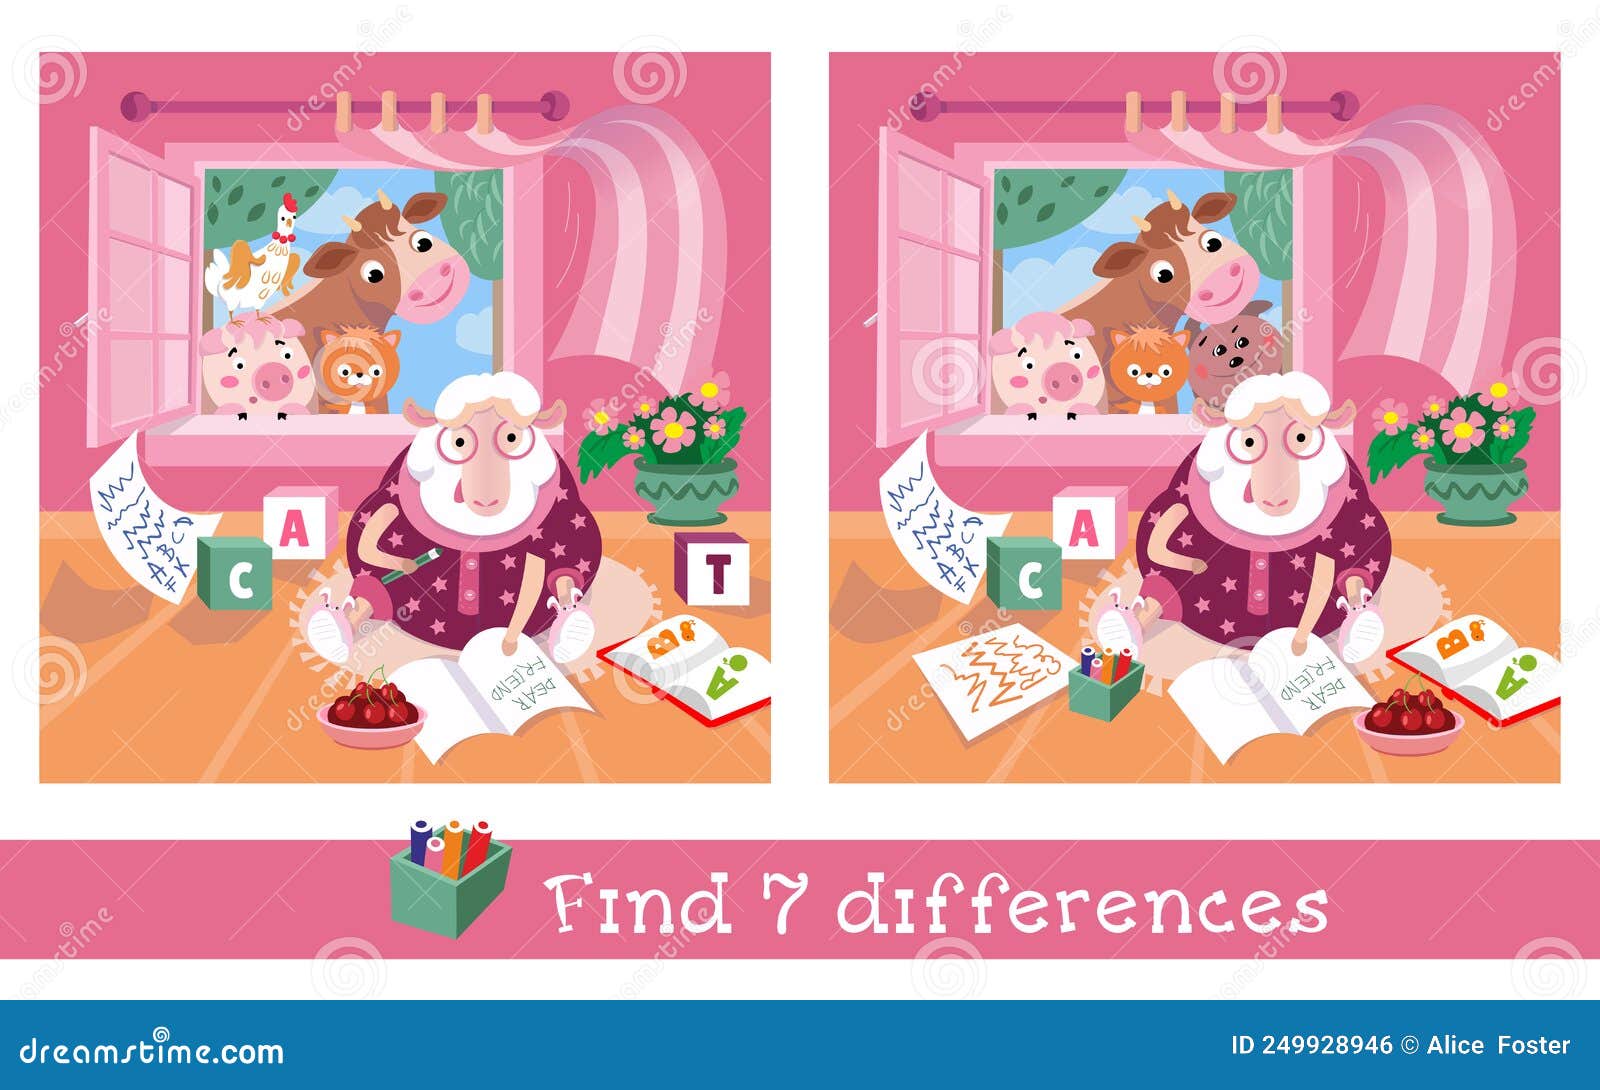 find-7-differences-game-for-children-activity-vector-illustration